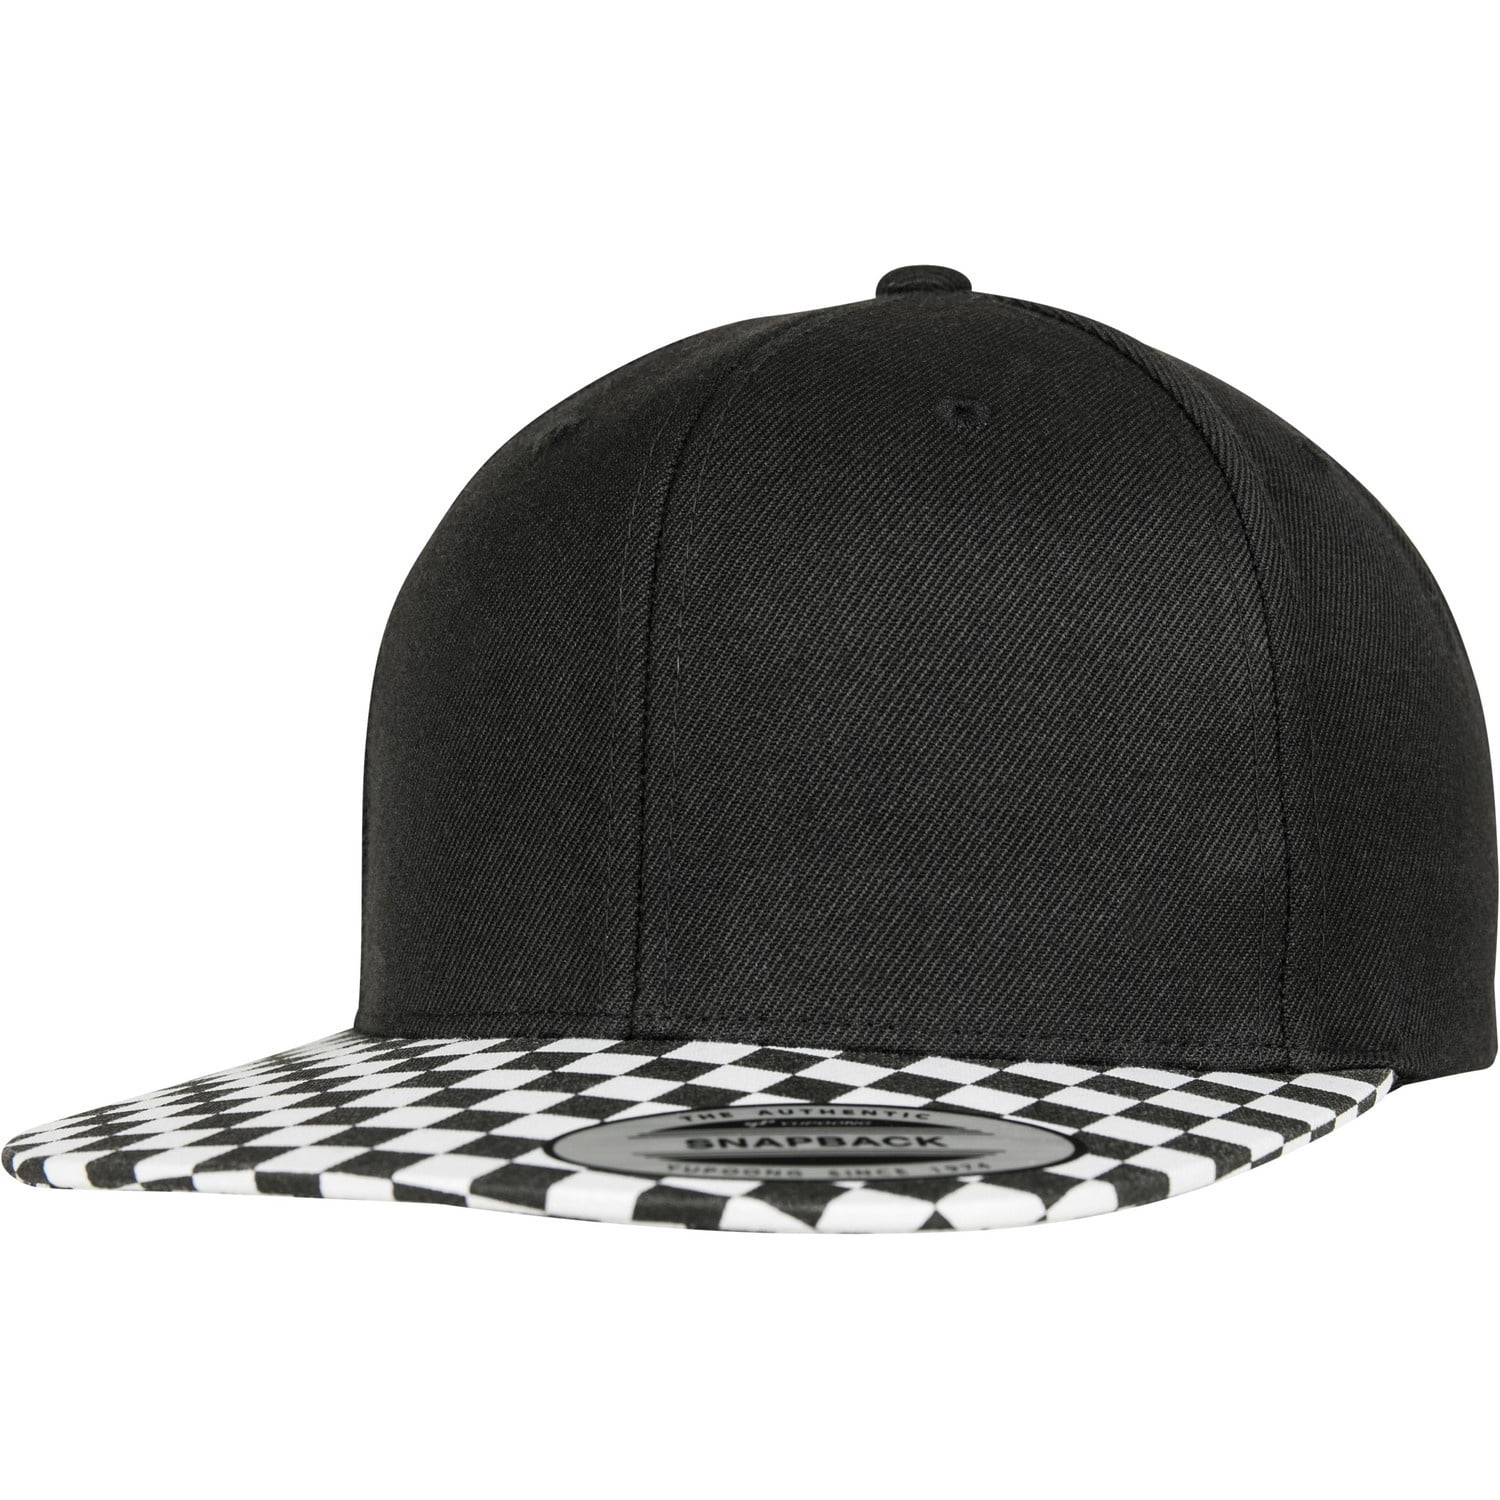 Flexfit By Yupoong Checkerboard Snapback Cap